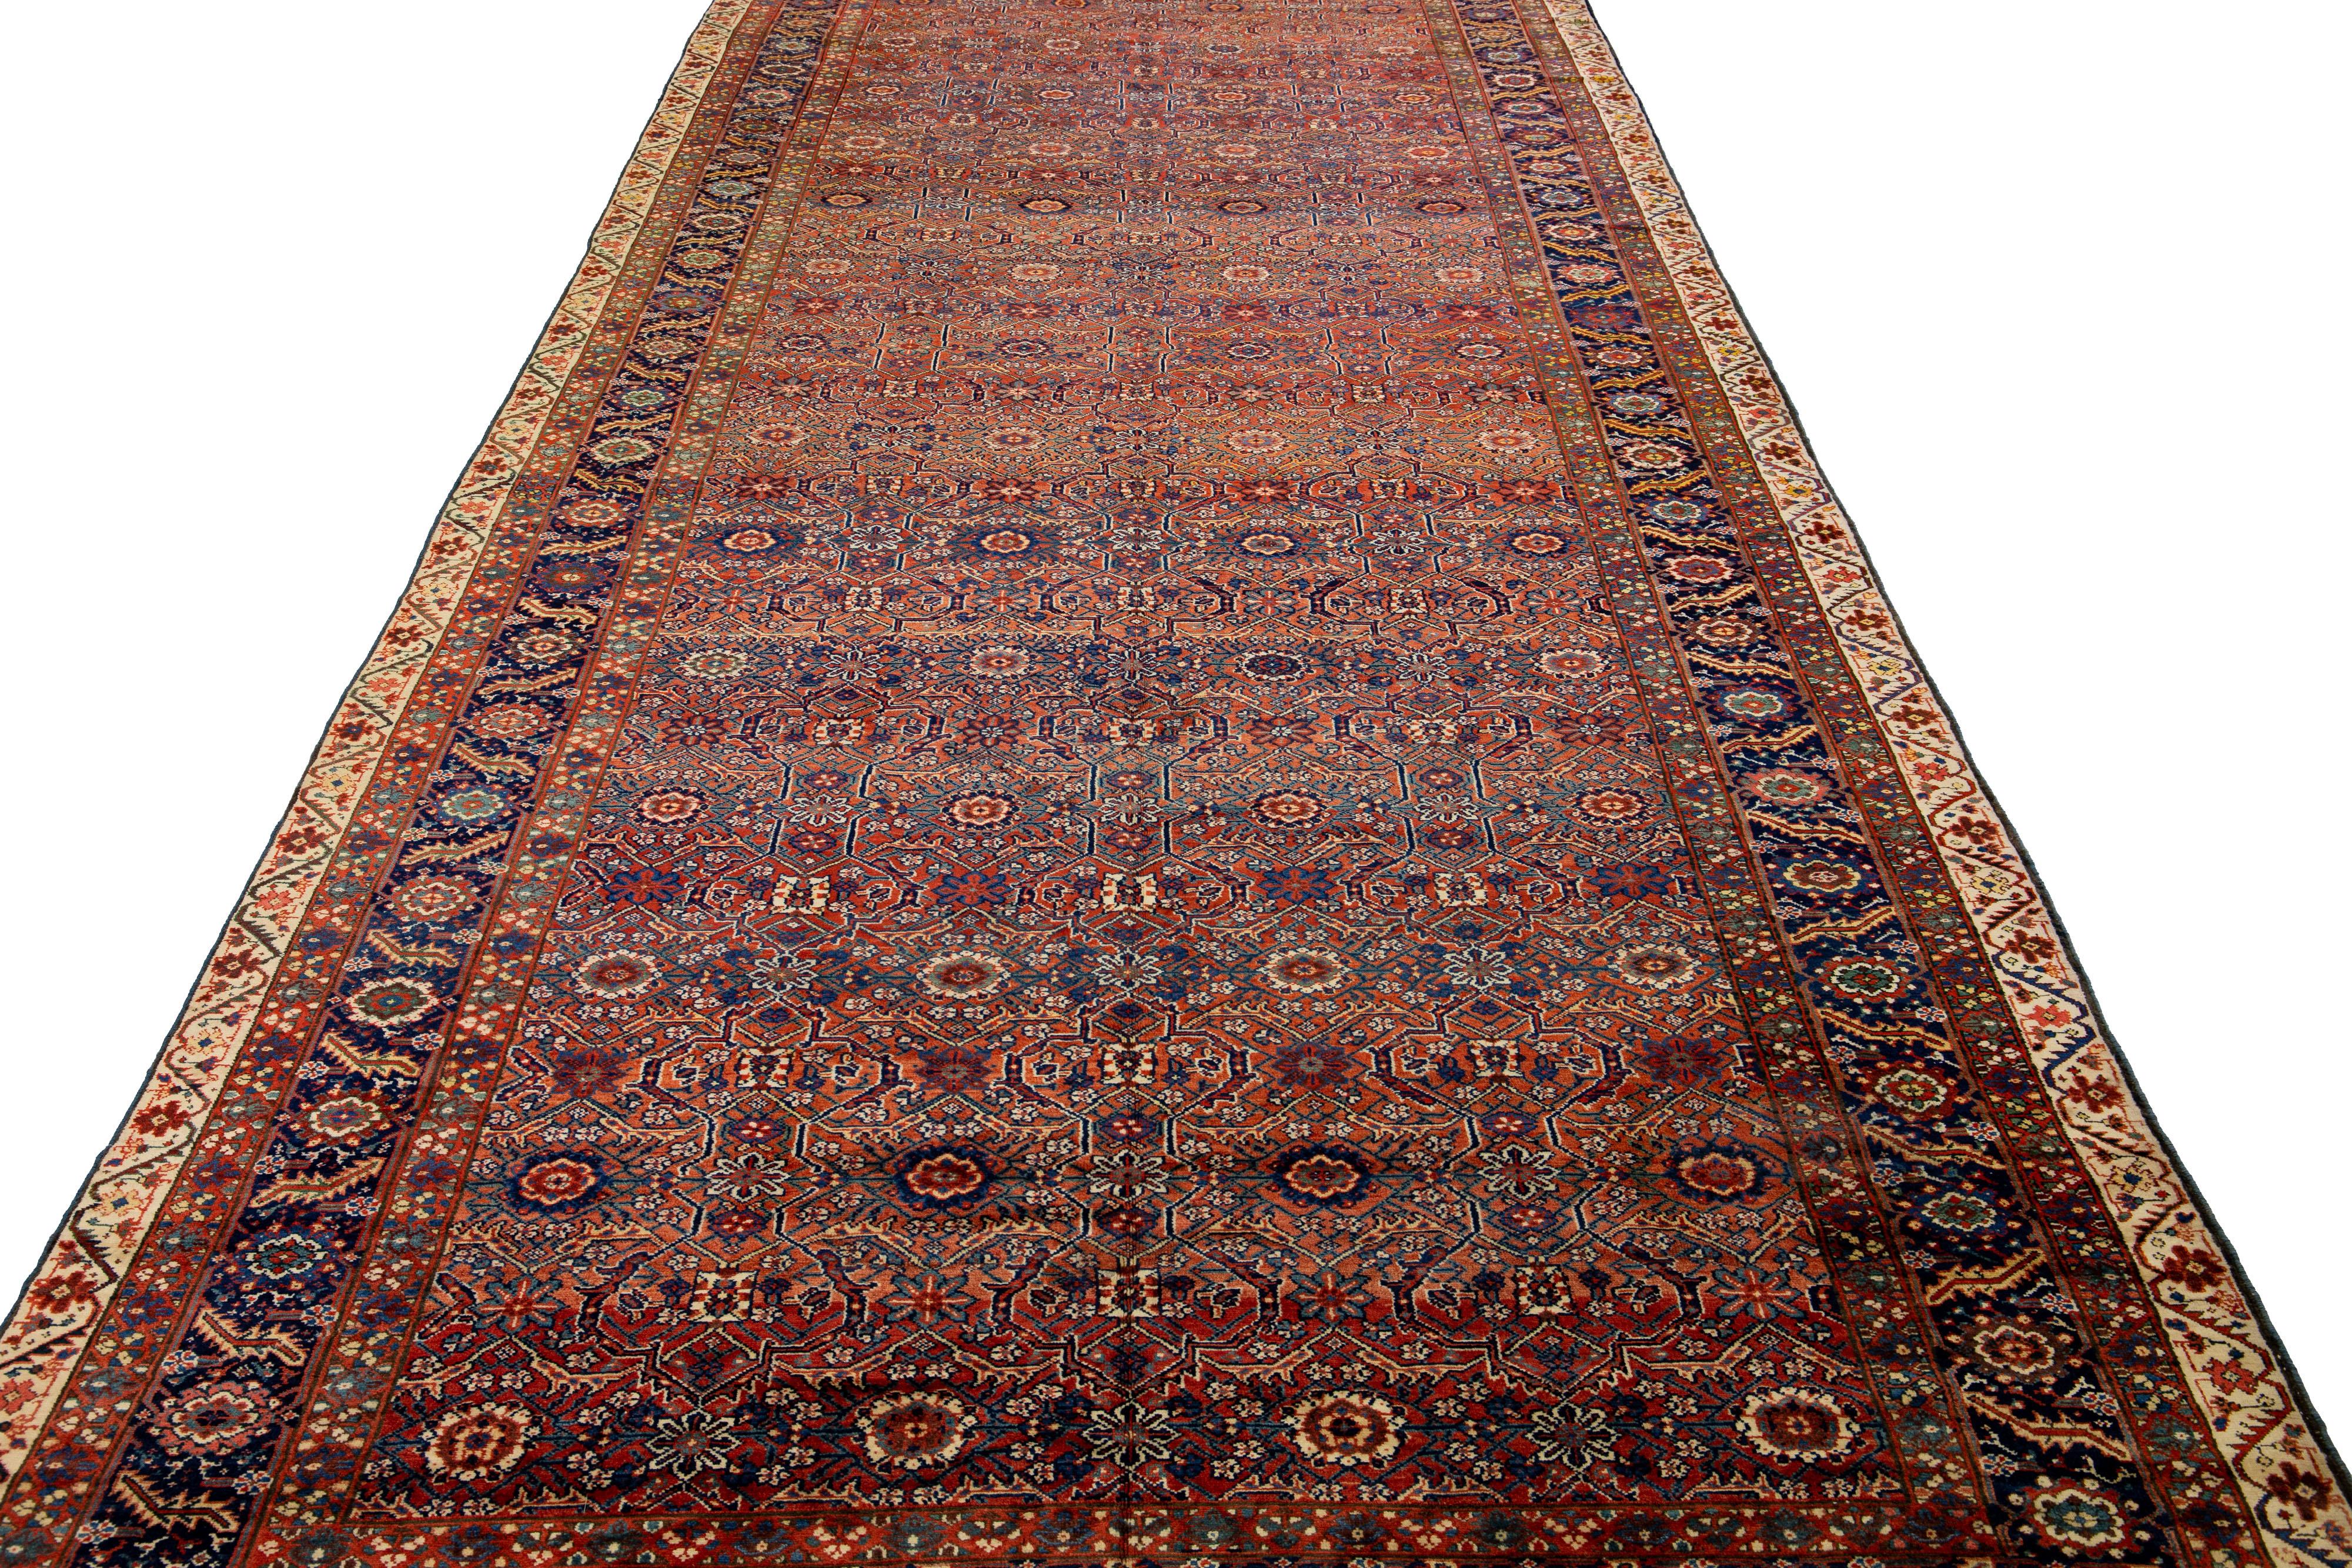 Beautiful antique Malayer hand-knotted wool rug with a rust color field. This Malayer piece has a designed frame with multicolor accents in a gorgeous all-over geometric pattern design.

This rug measures: 9'7